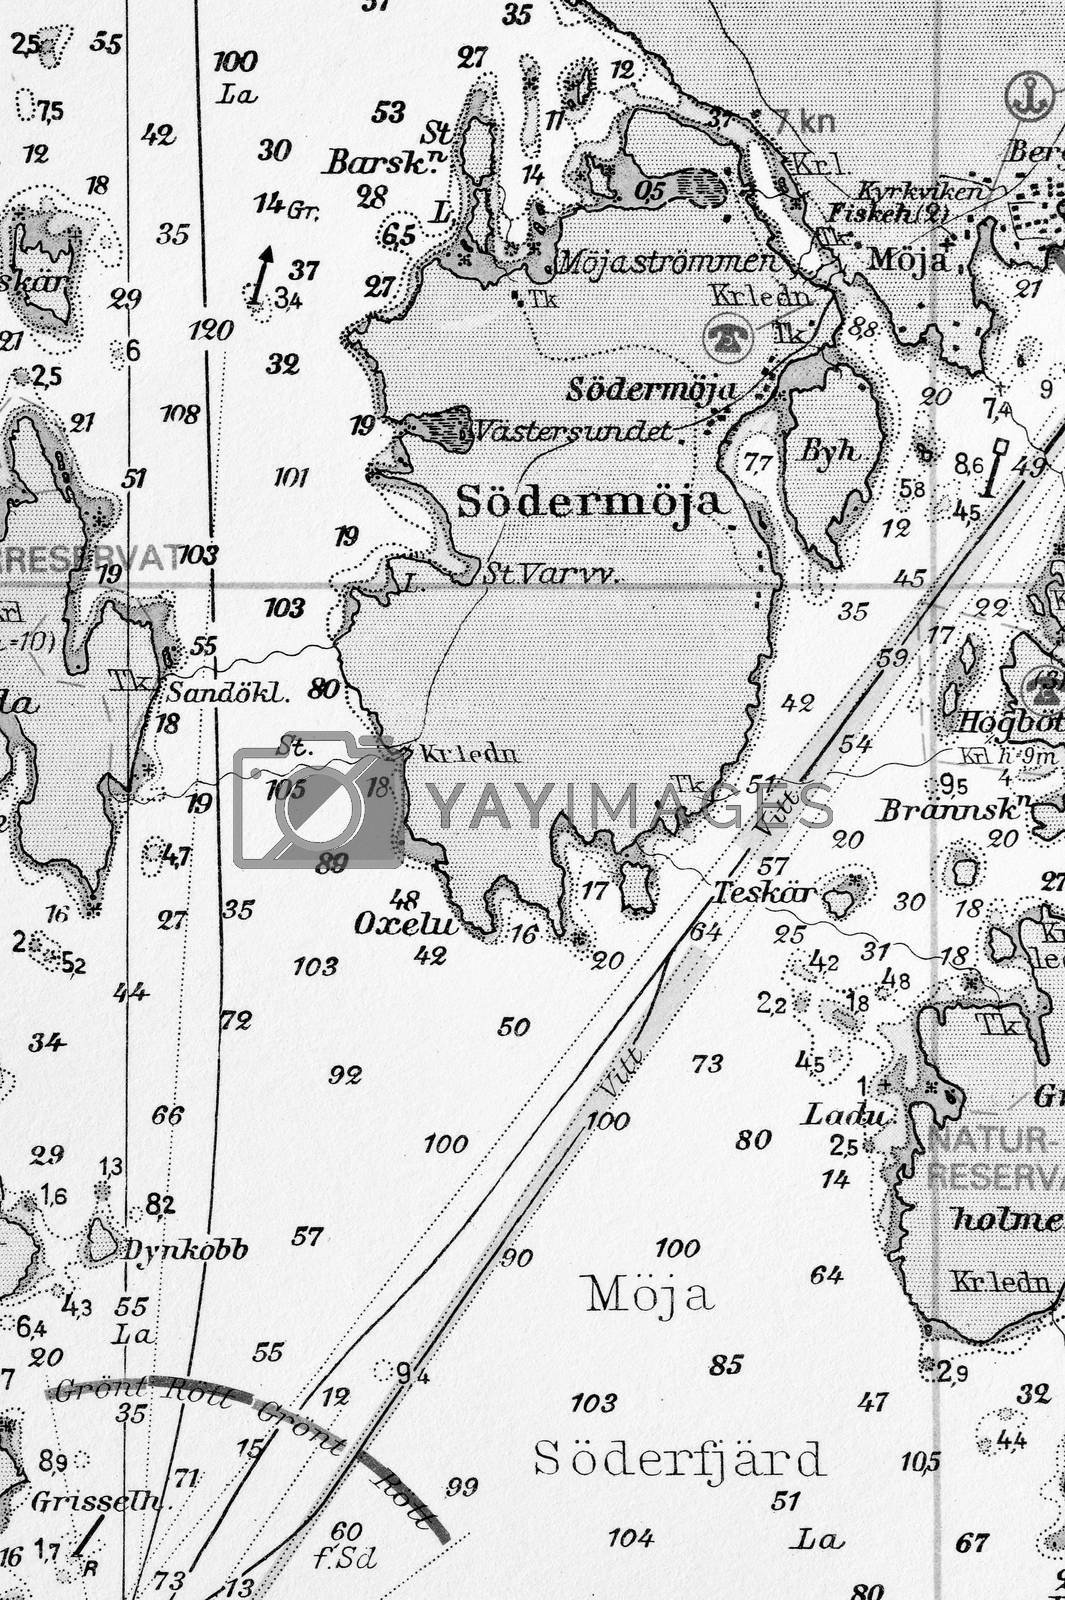 Royalty free image of Macro shot of a old marine chart, detailing Stockholm archipelago by a40757